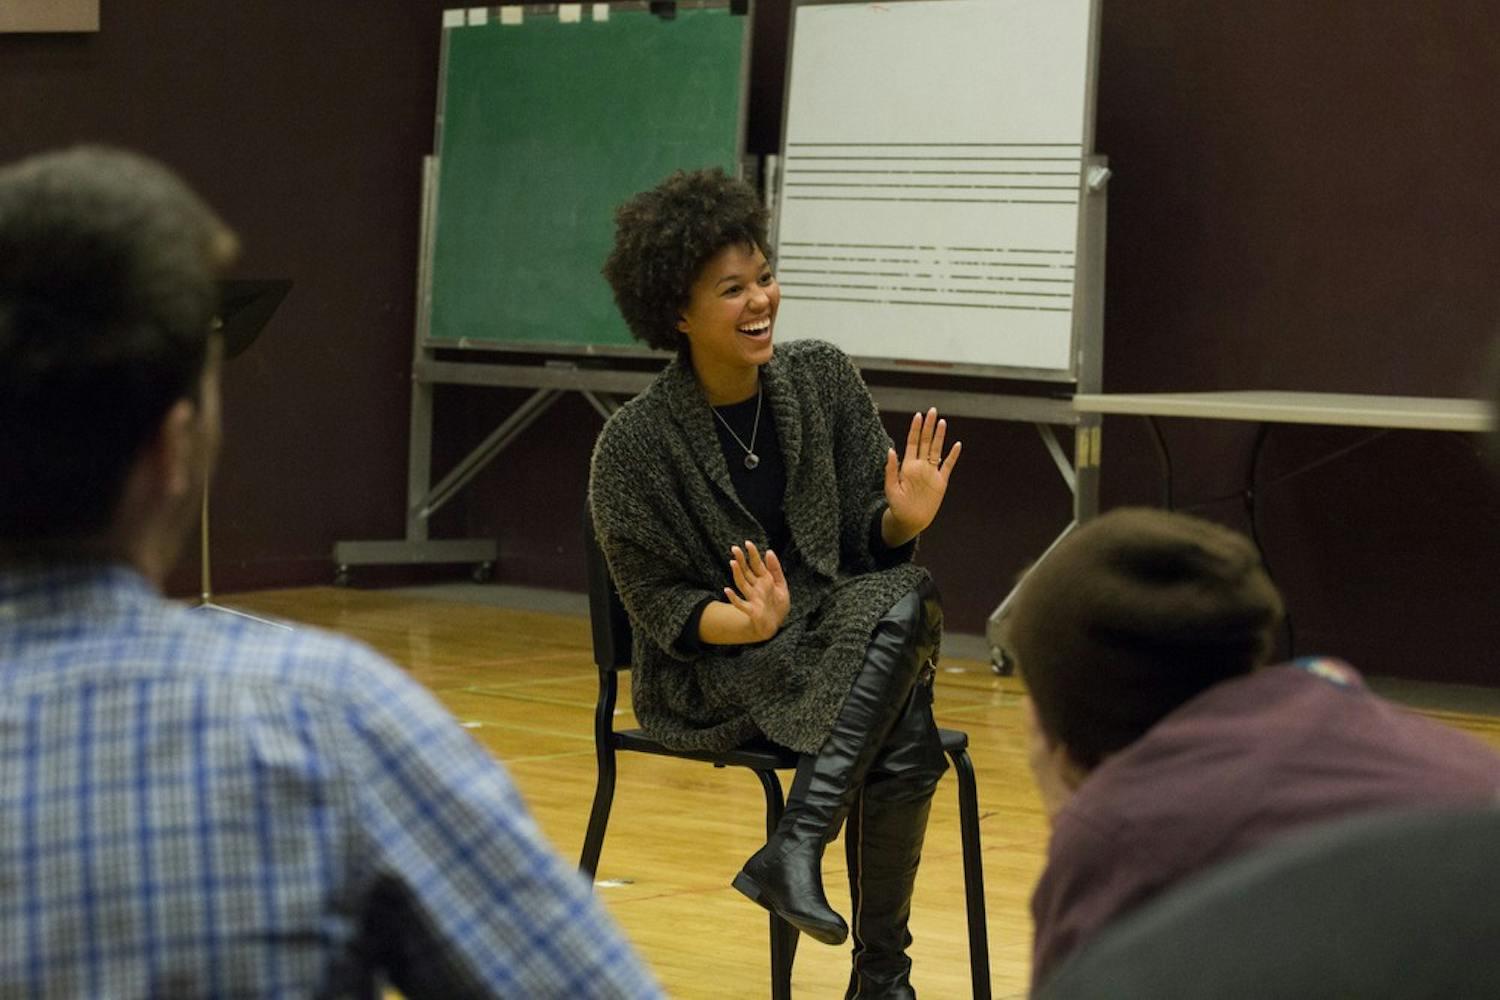 Alexandra Ncube engaging in a Q&A session with ASU Theatre and Music students on Wednesday, Nov 4, 2015 at the ASU School of Music.